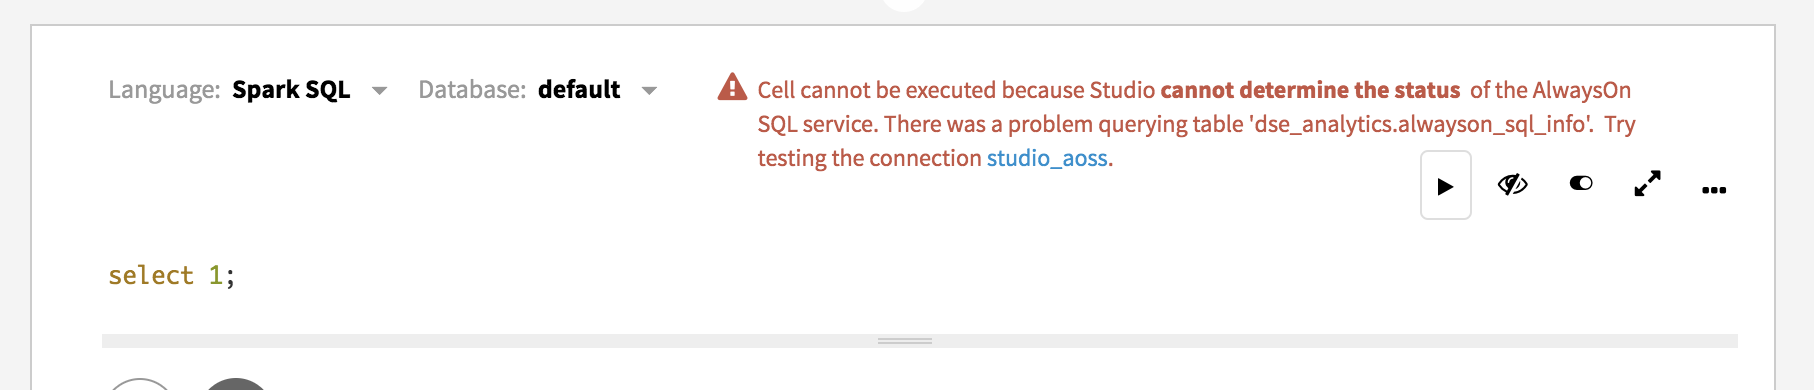 Studio error message displayed in SparkSQL notebook cell because Always On SQL Server (AOSS) does not have permission to access data